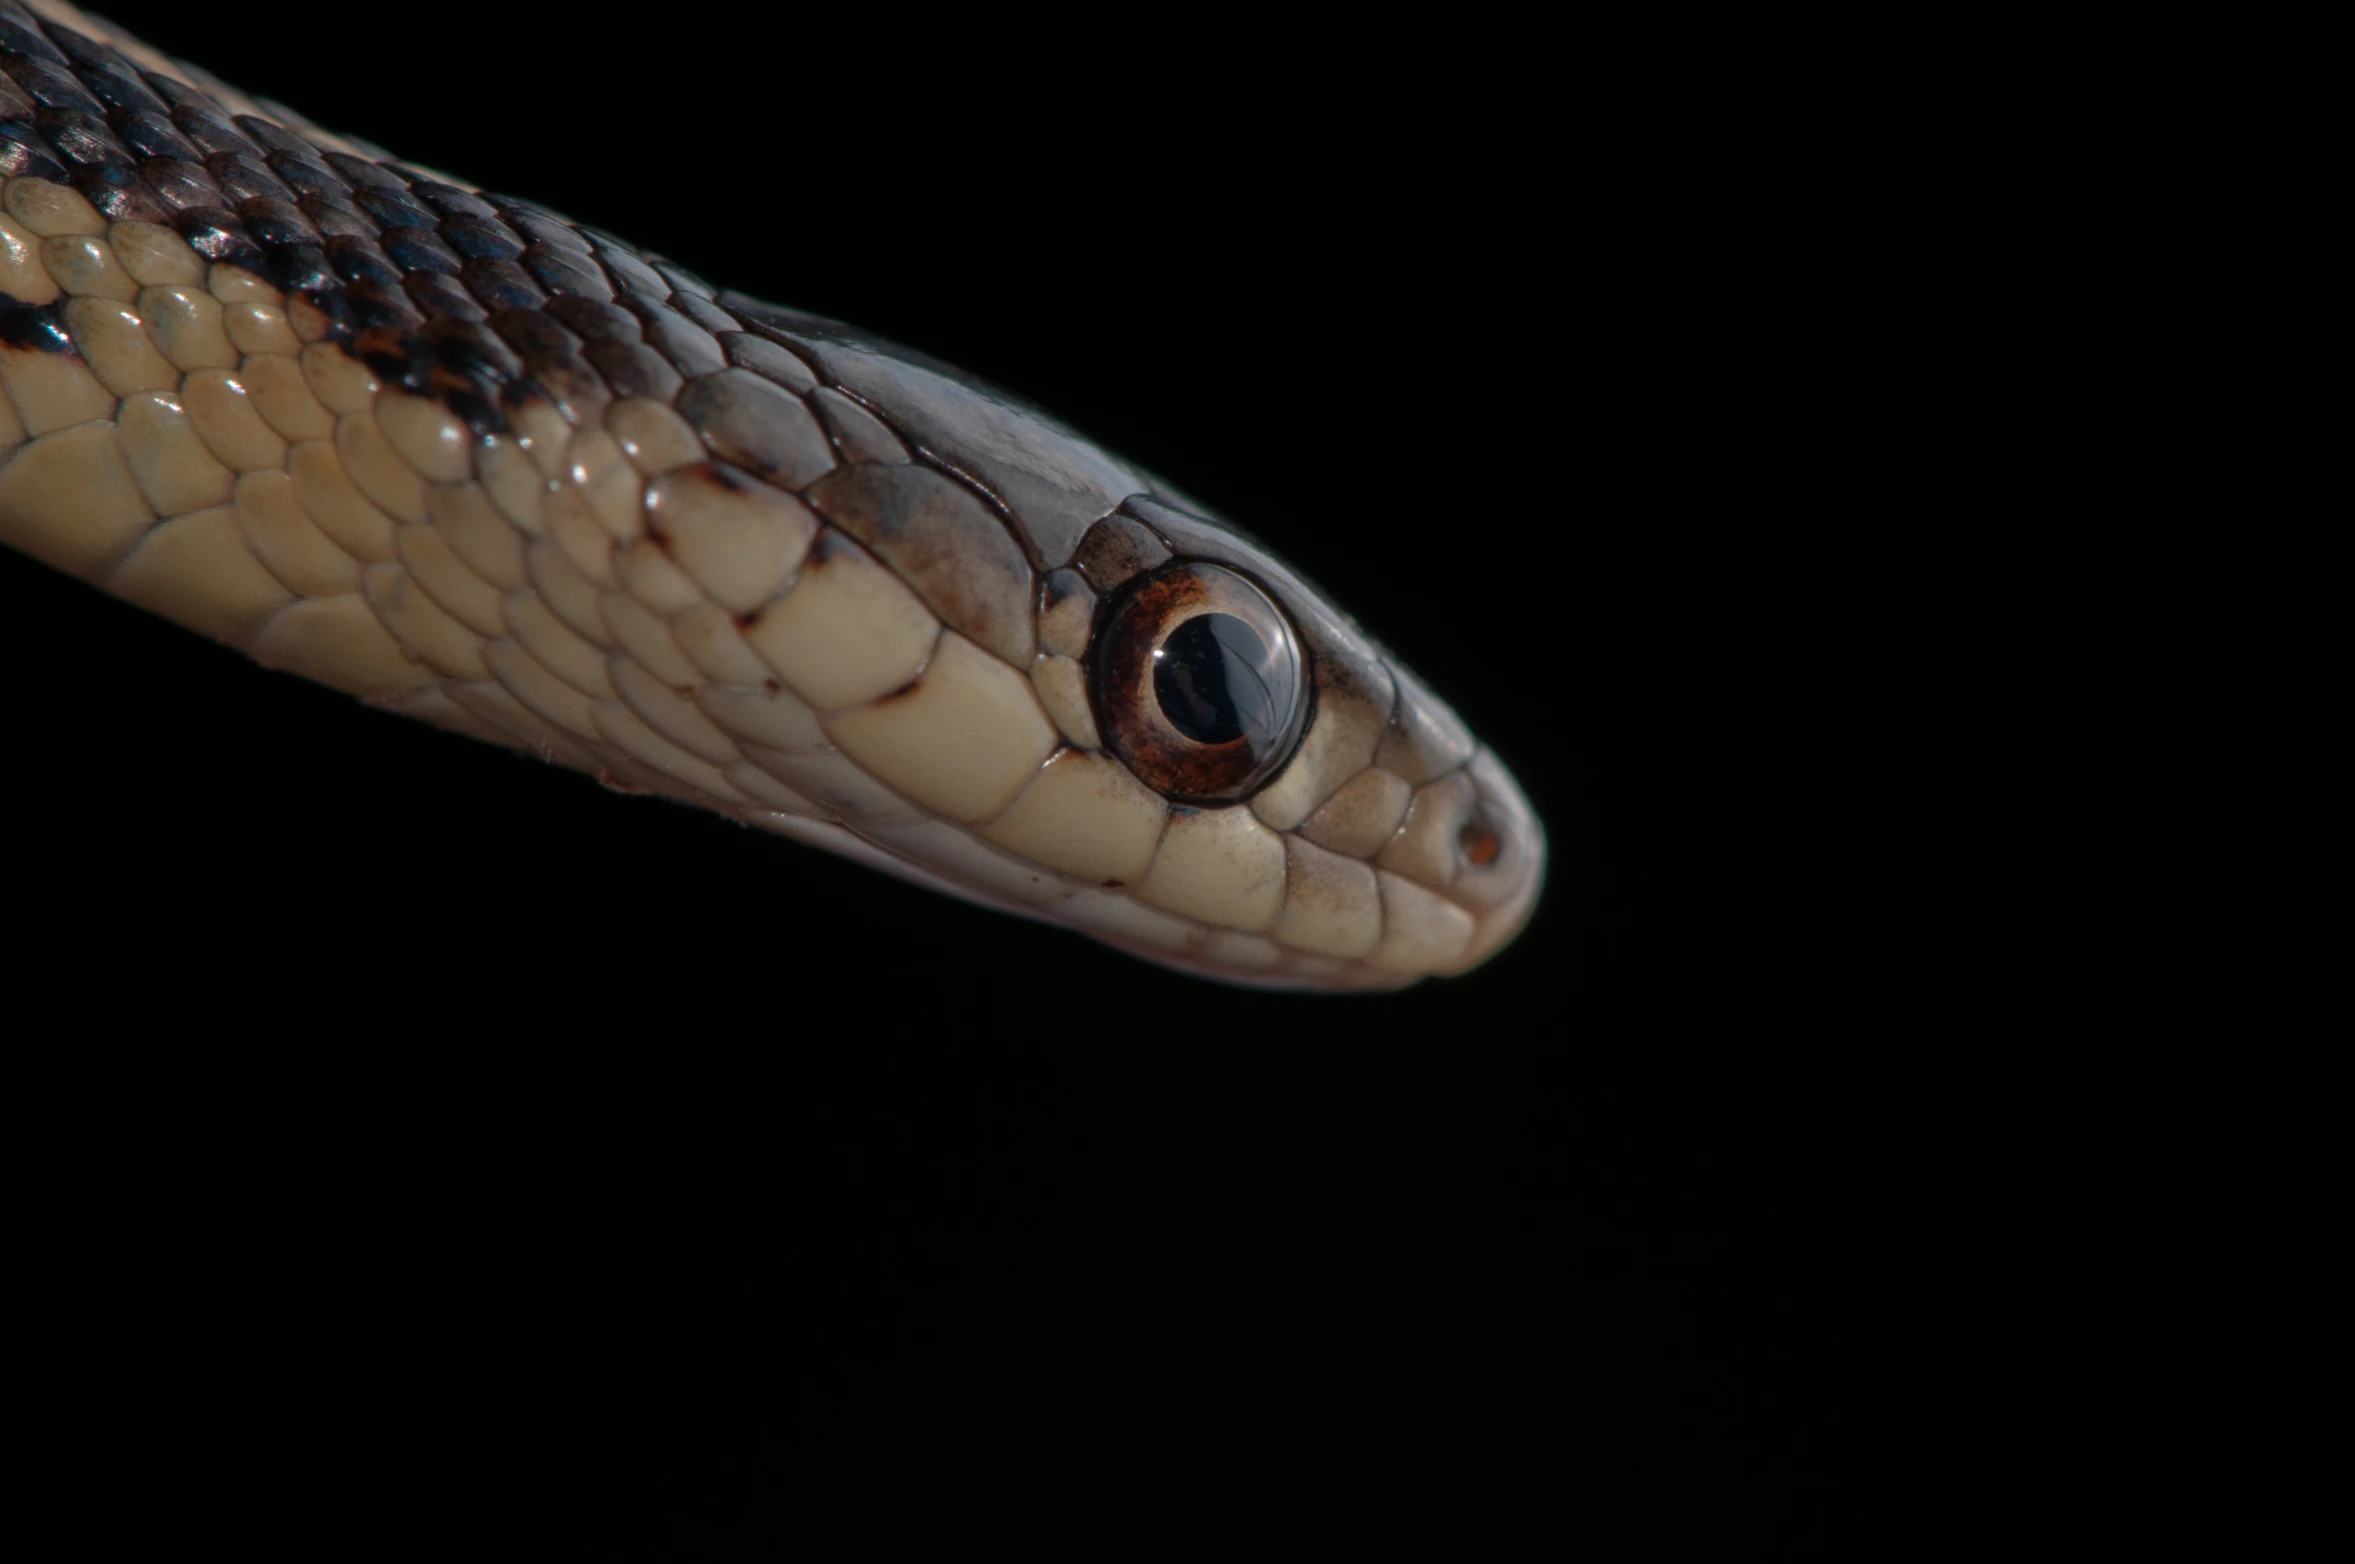 a close up of a brown snake with eyes